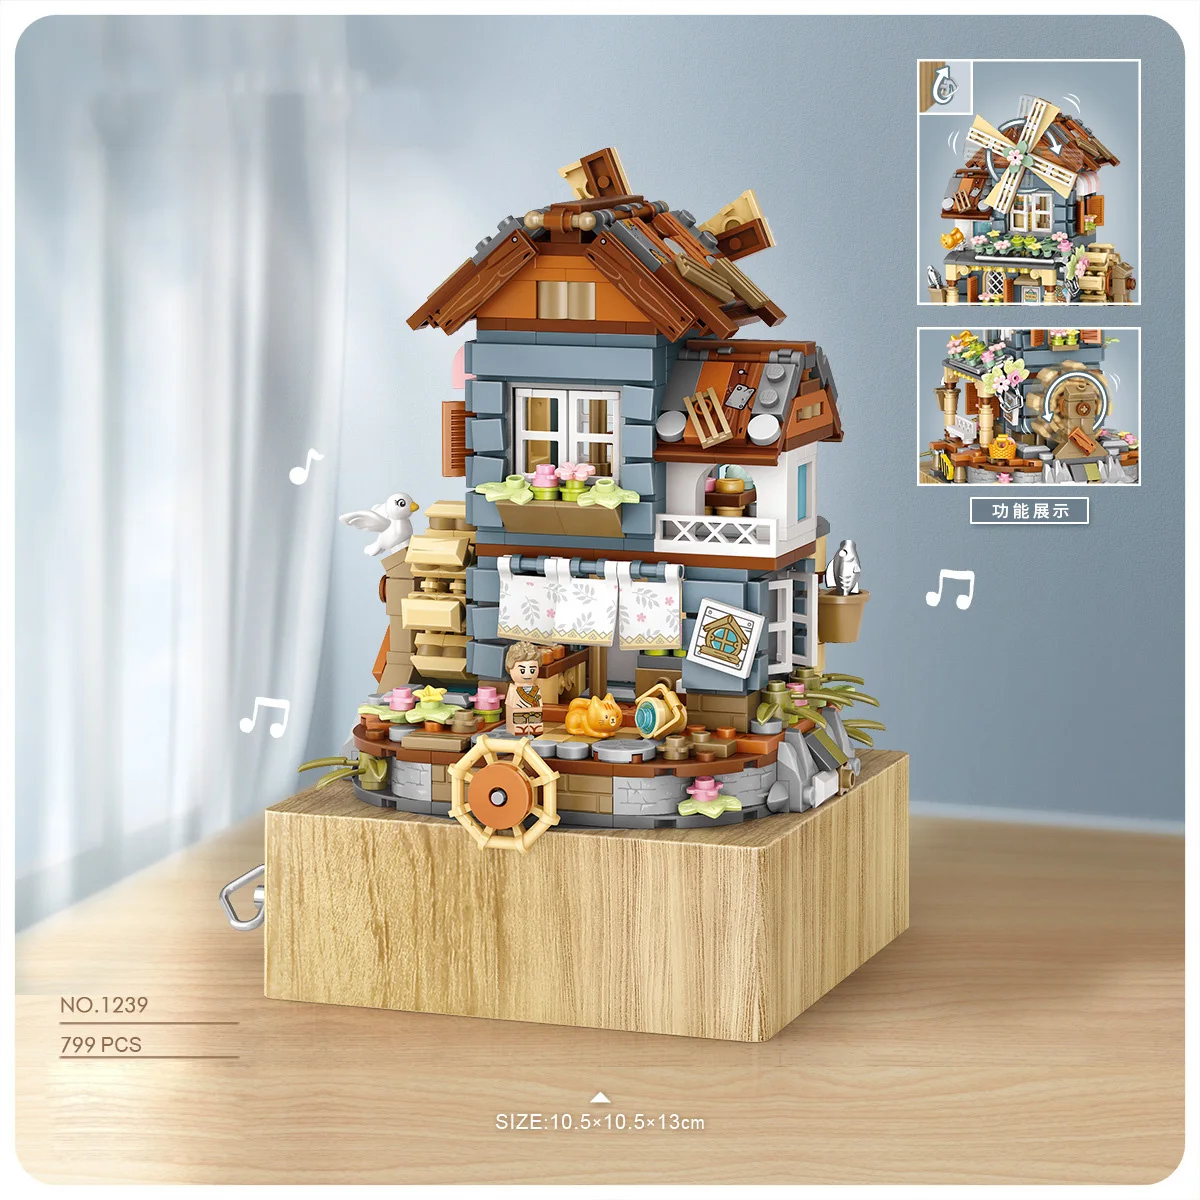 

Creative Windmill House Music Box Mini Block Rural Street View Figures Model Building Brick Assemble Toy For Children Gifts